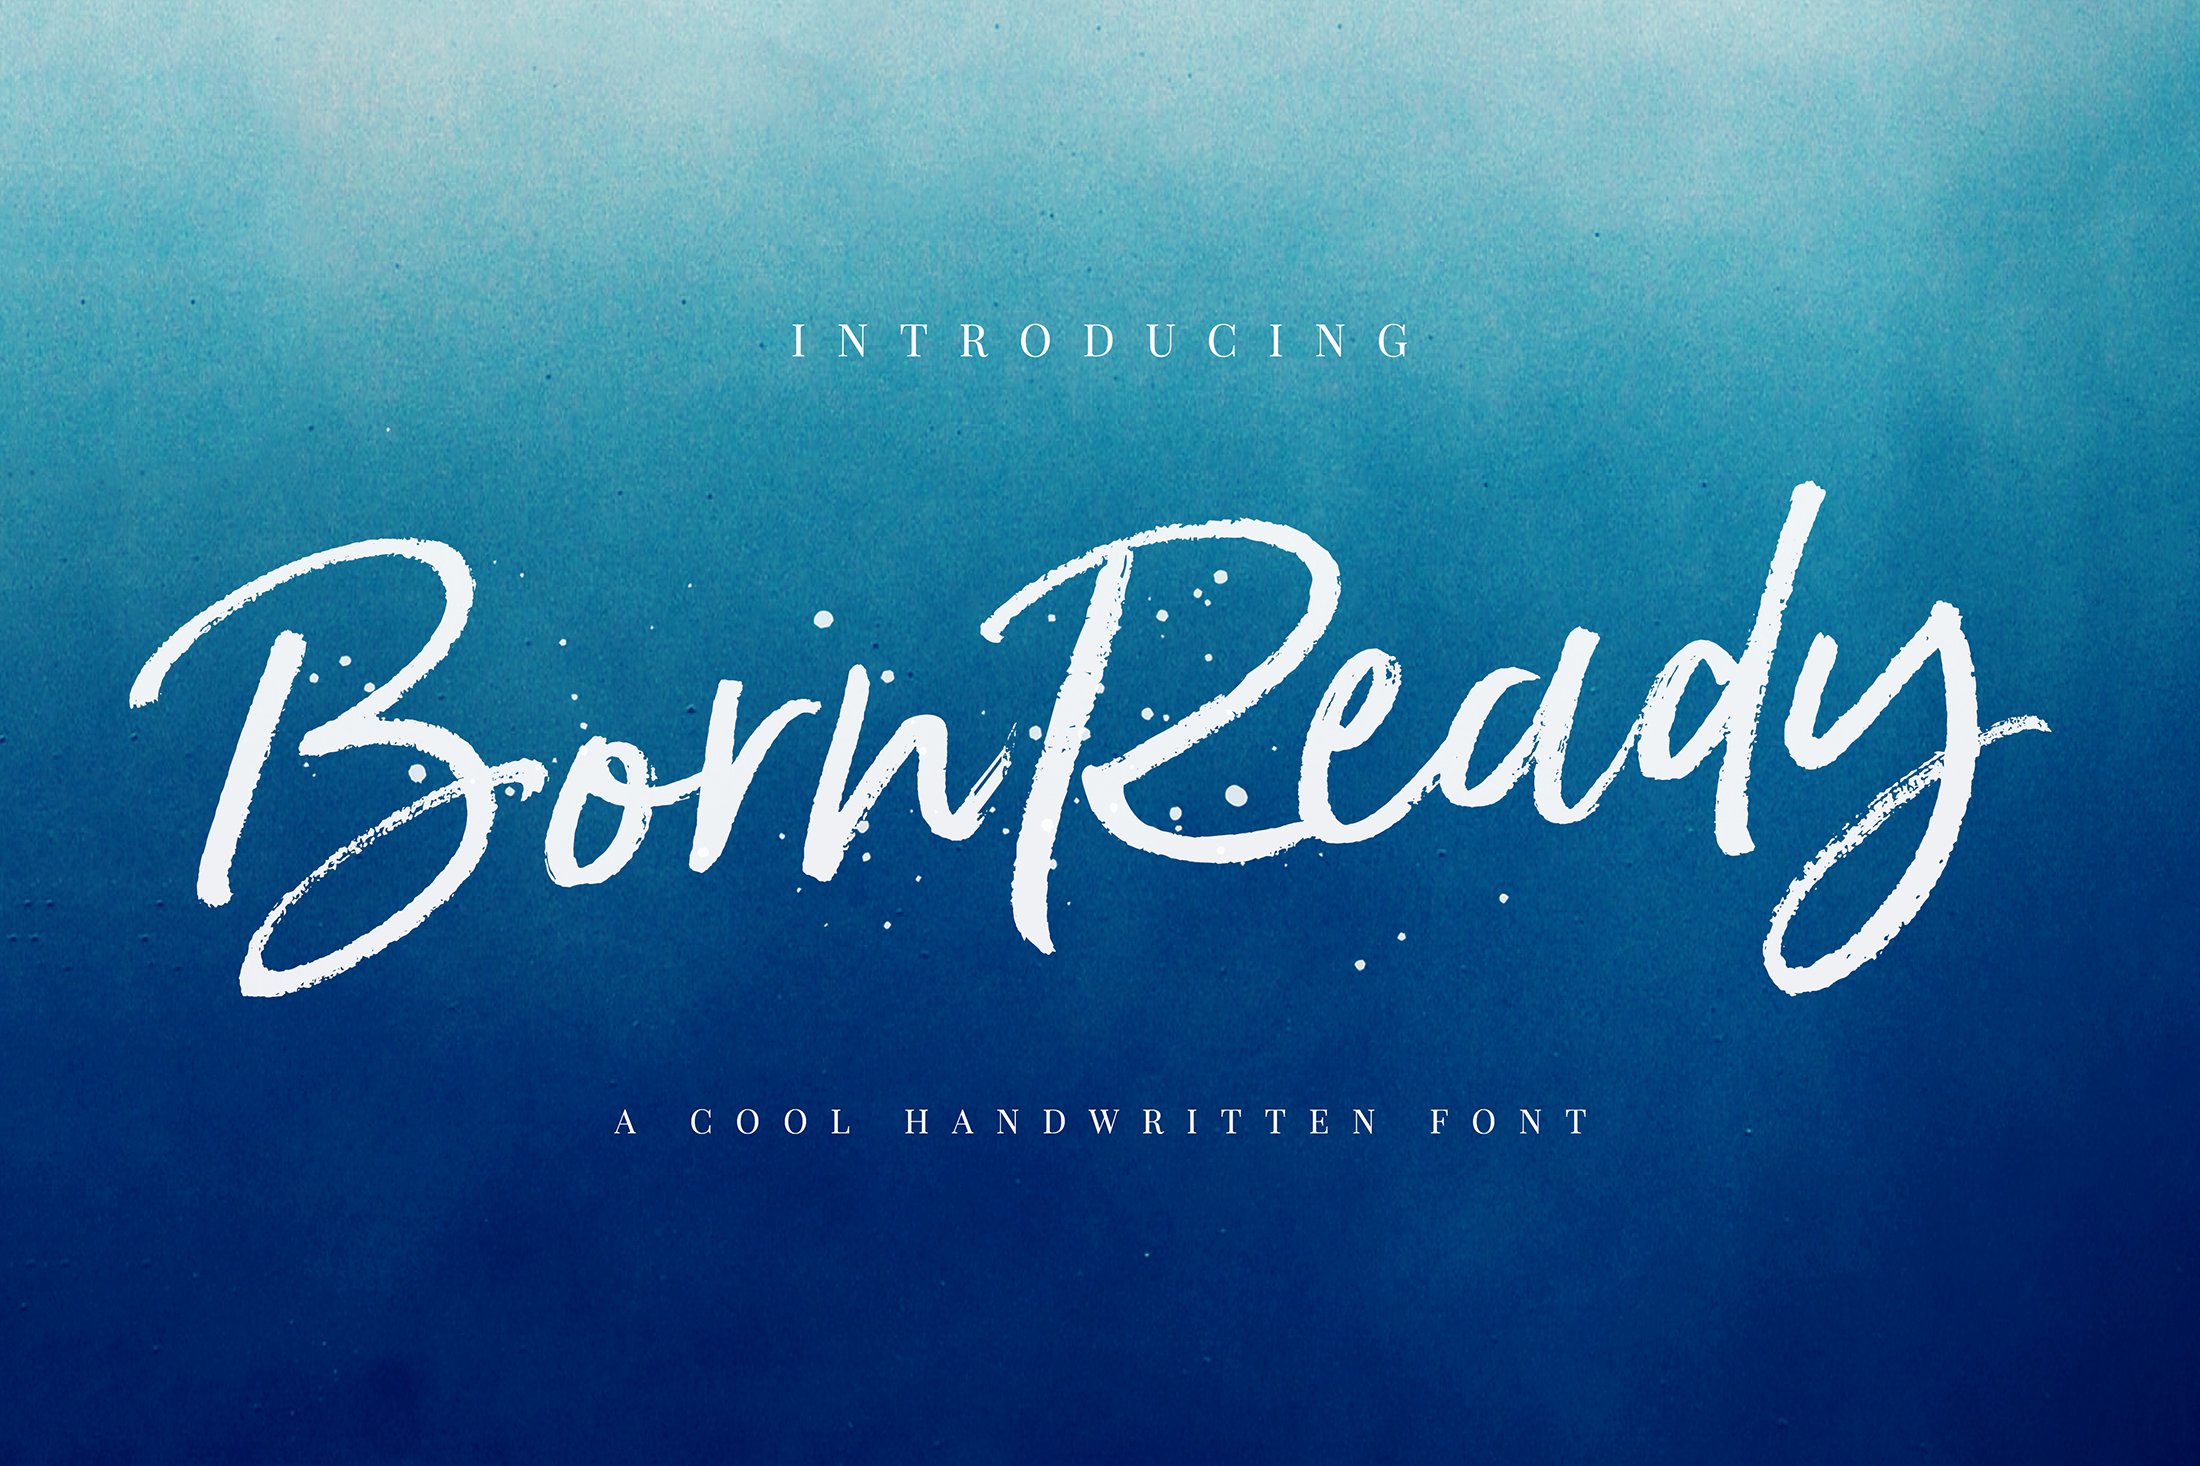 Born Ready Marker Font cover image.